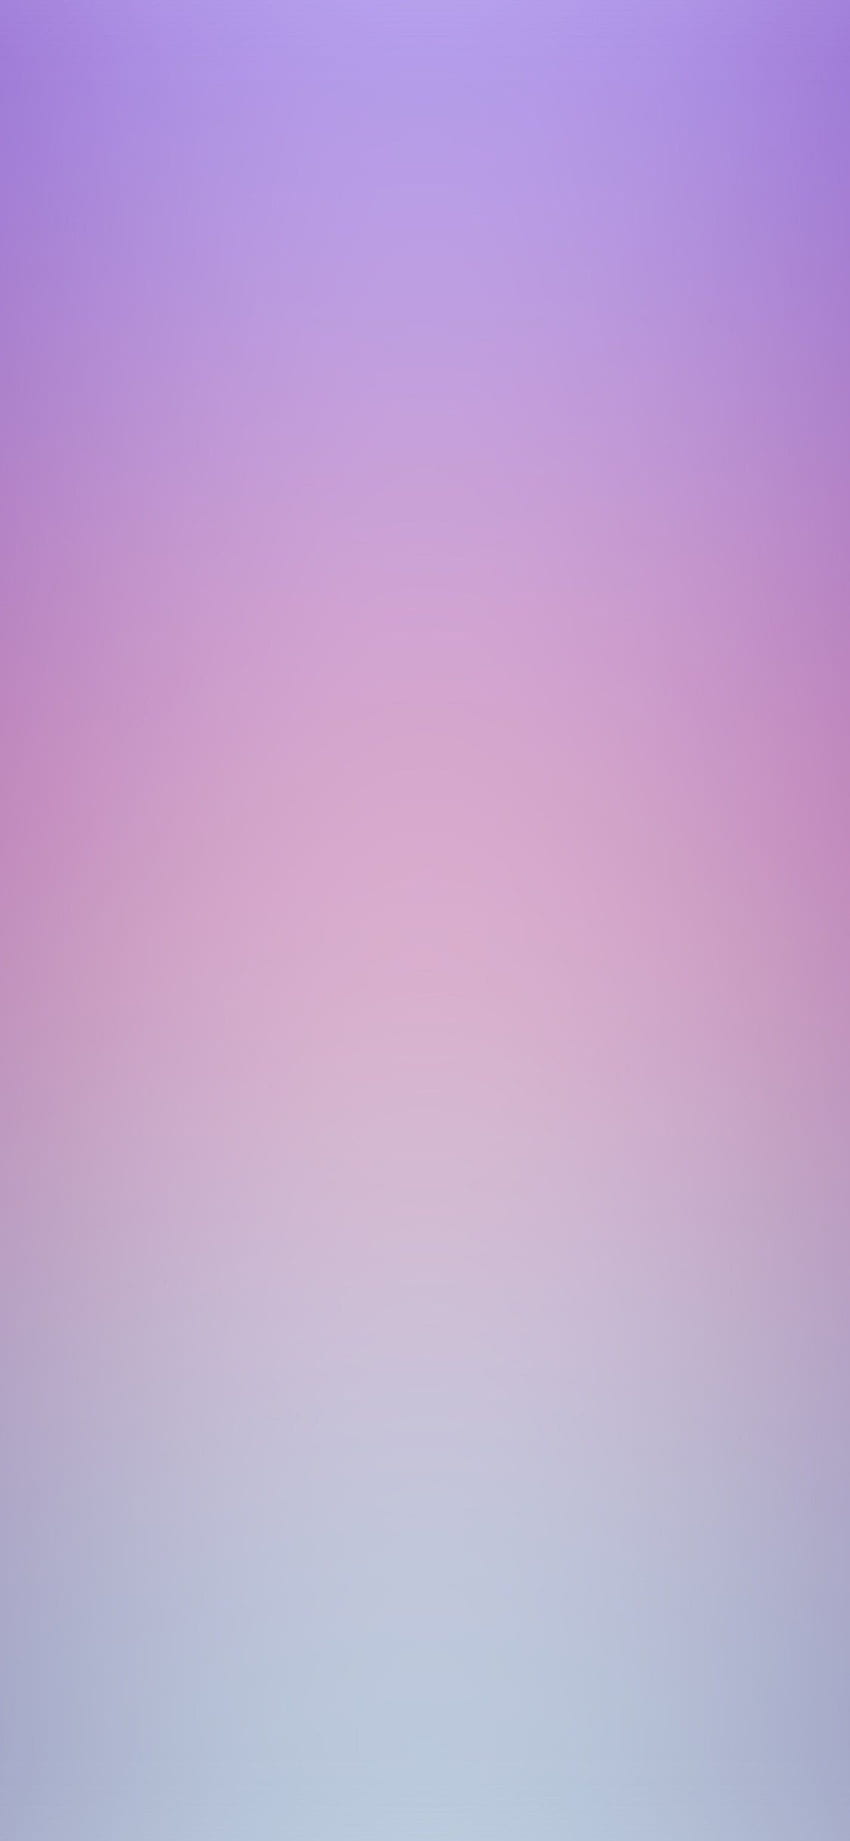 Download wallpaper 938x1668 lilac background color texture iphone  876s6 for parallax hd background